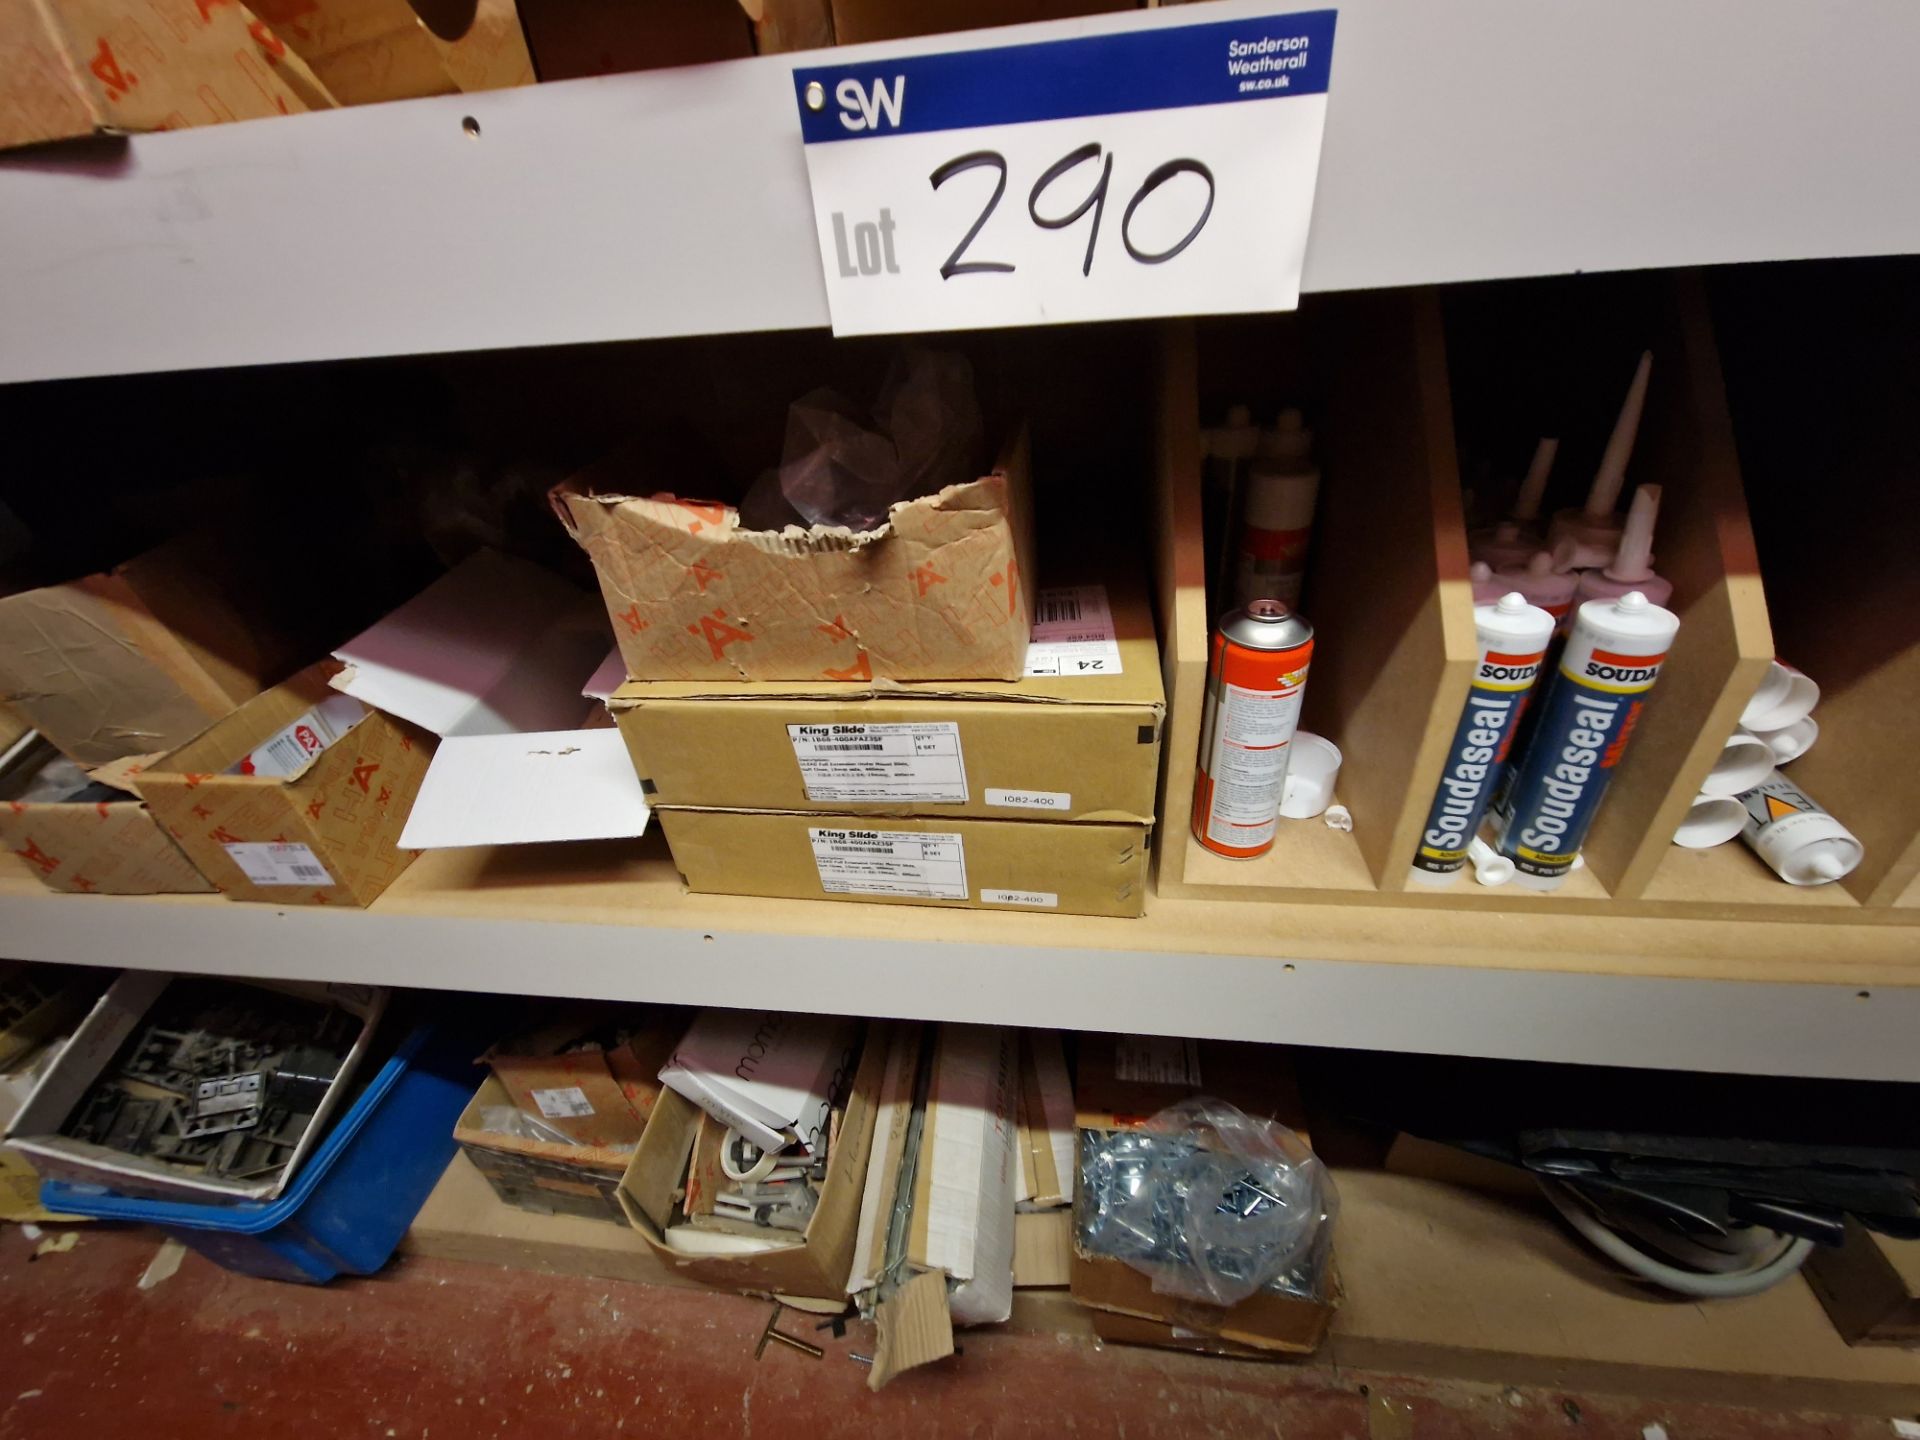 Contents to One Bay of Racking, including Fixtures, Fittings, Bolts, Drawer Runners, Bar Legs, - Image 12 of 32